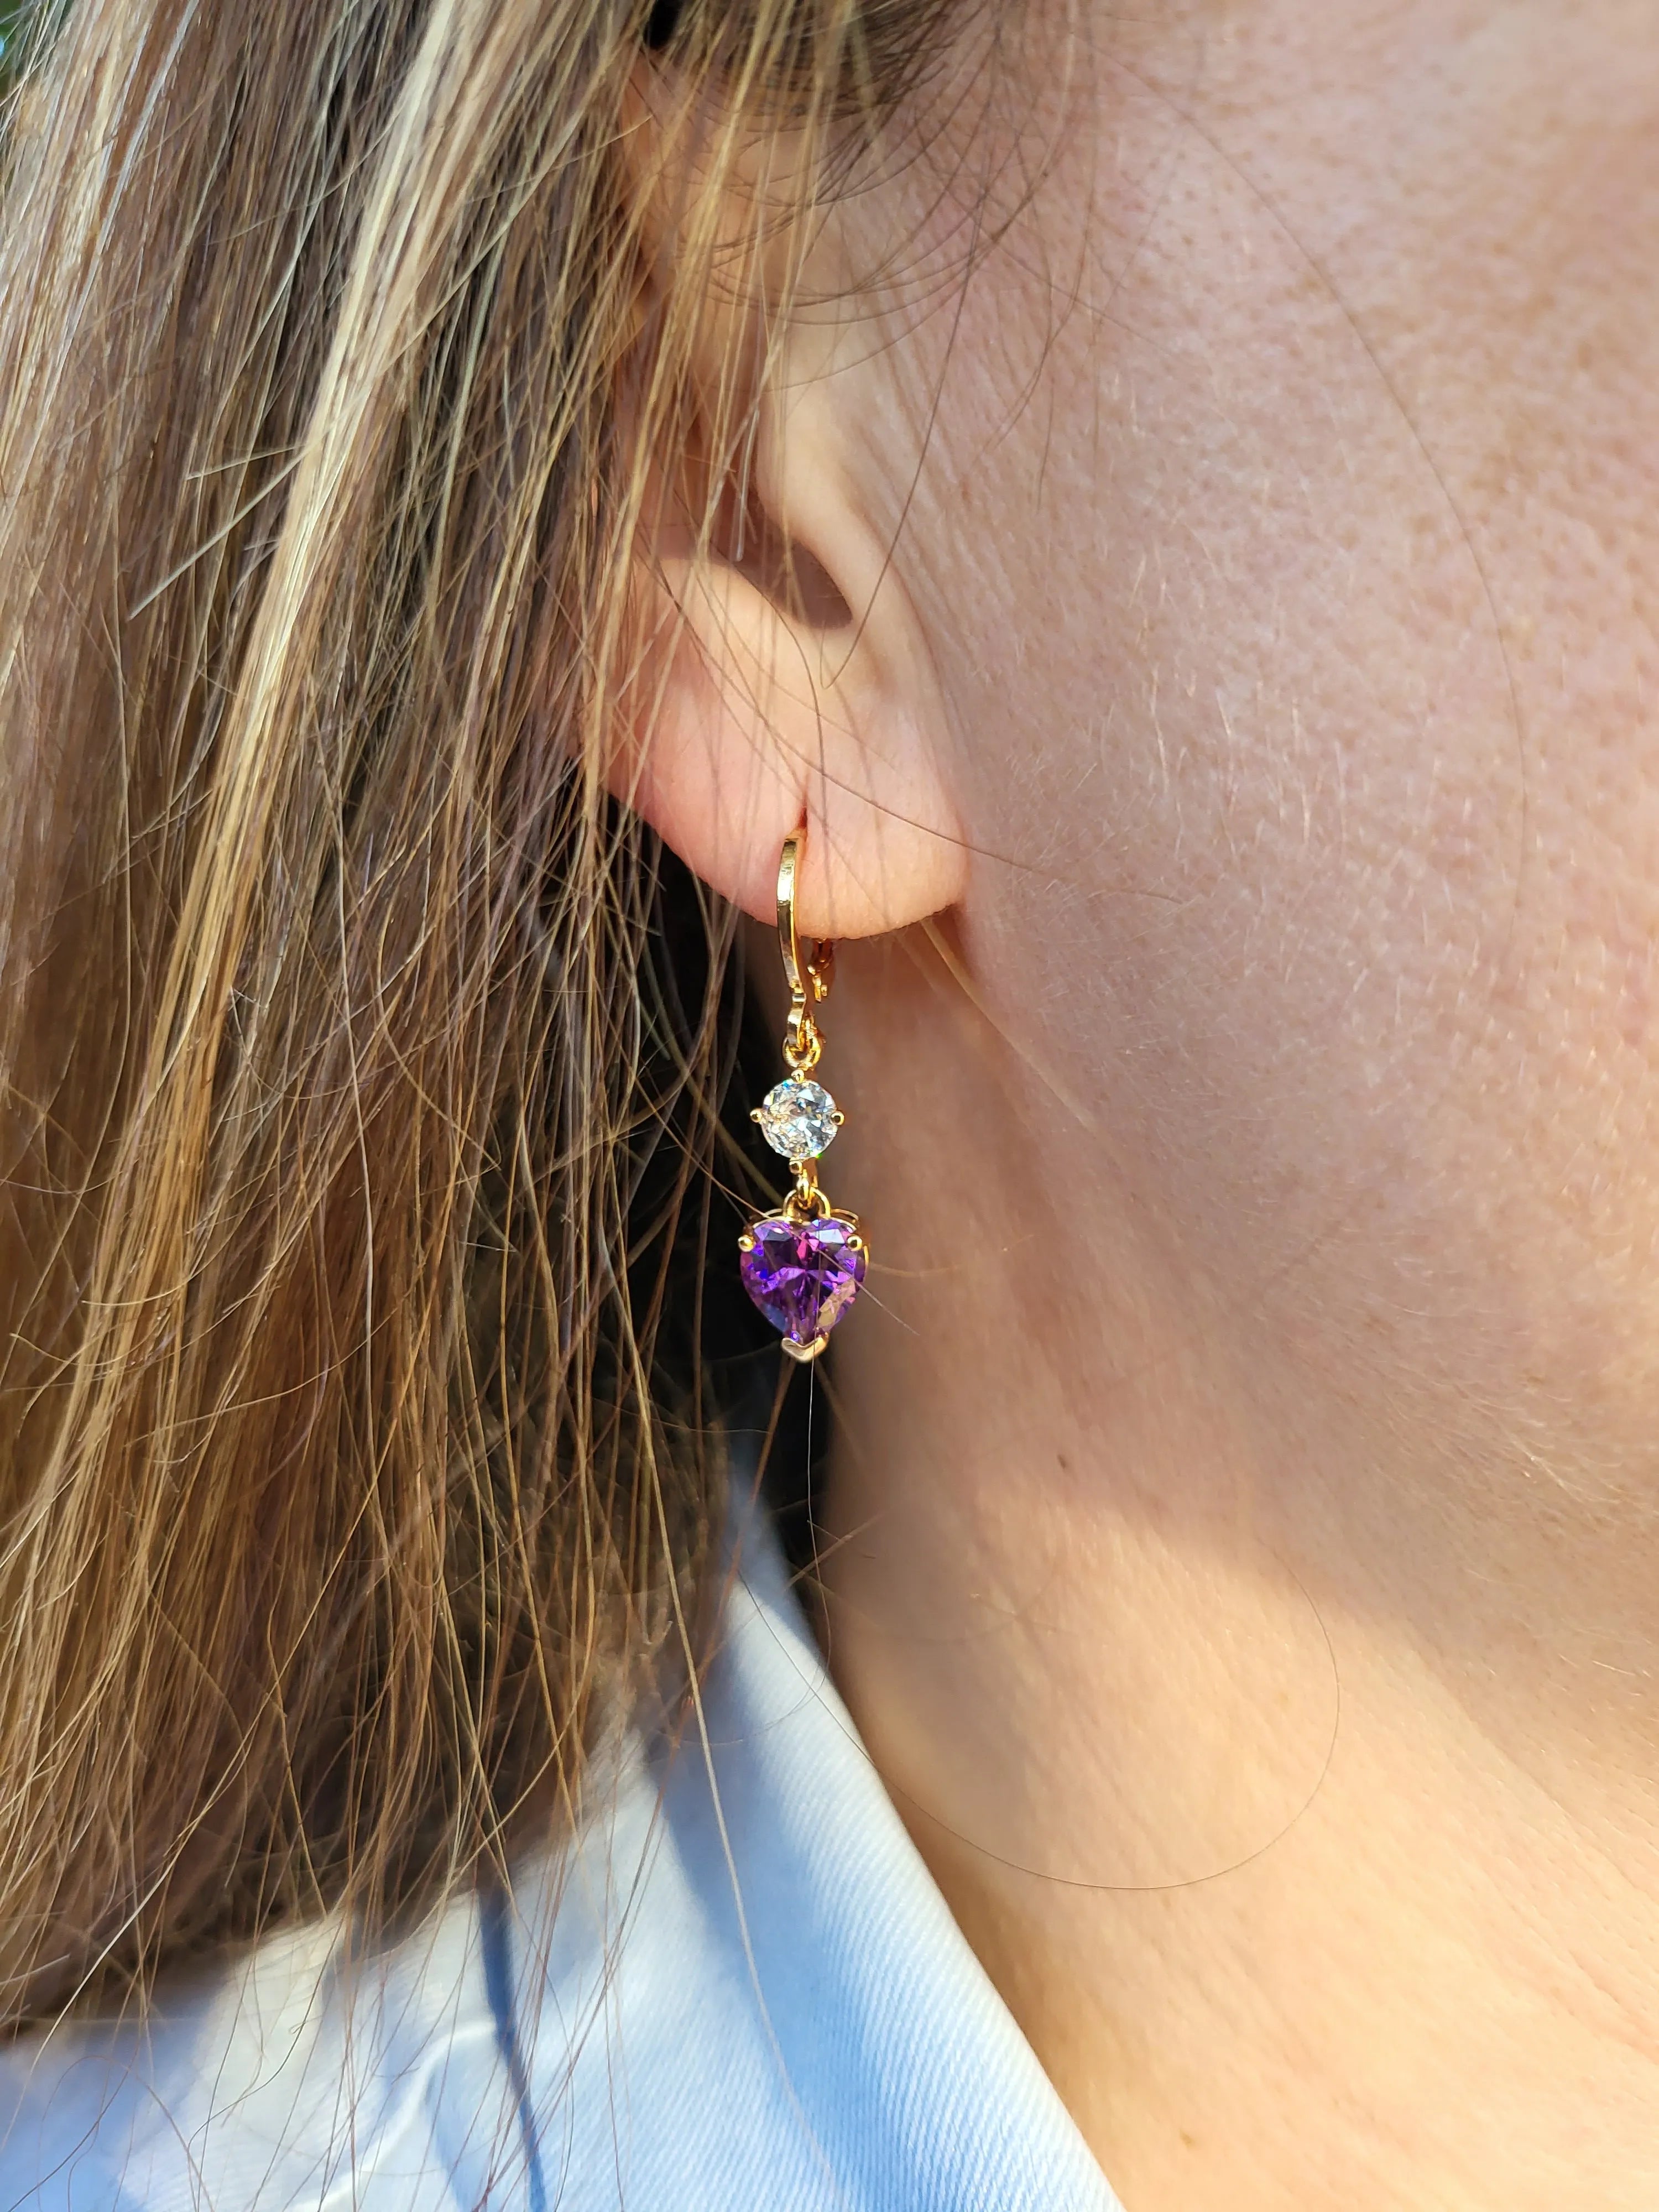 Gold Filled Heart Dangle Earrings product images.